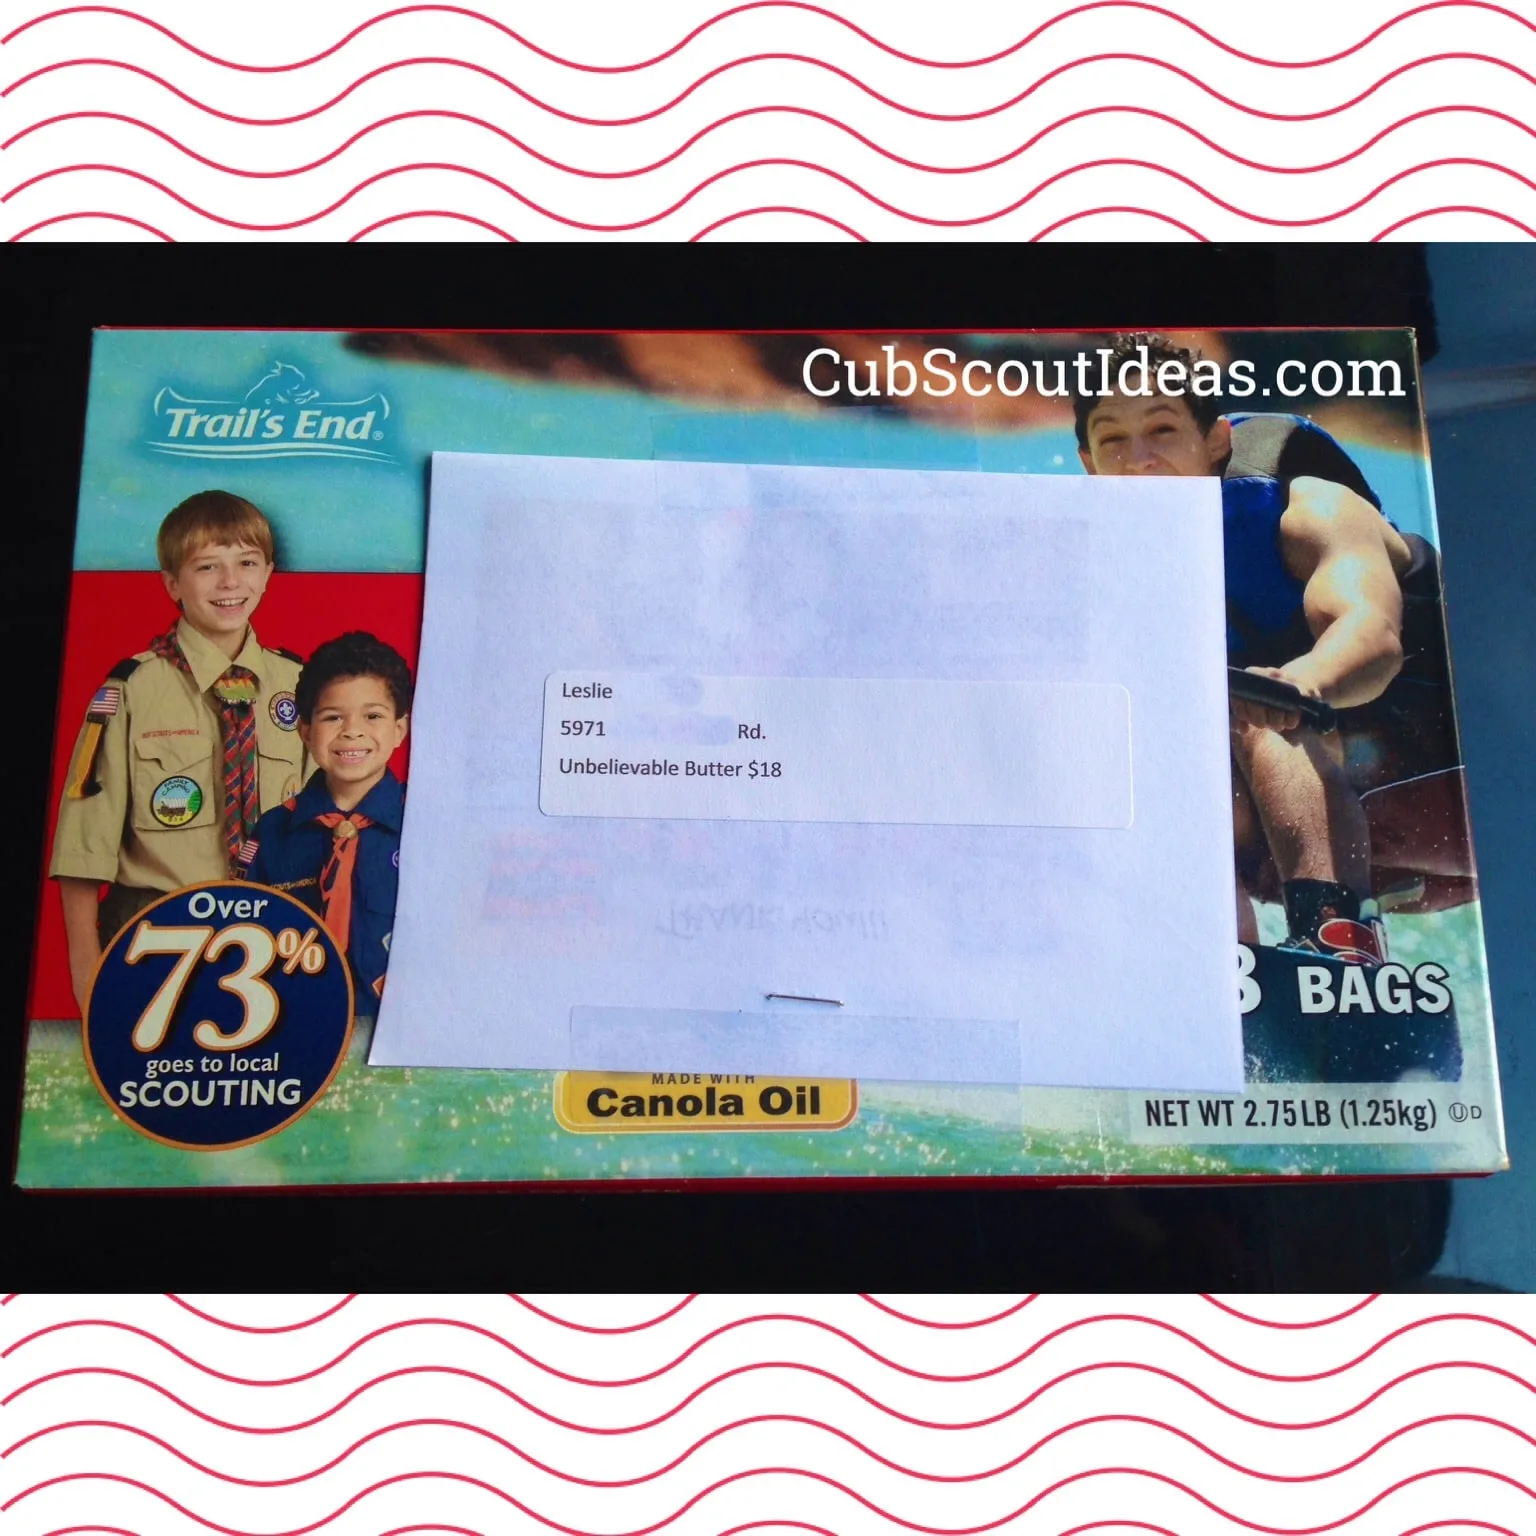 cub scout popcorn thank you notes